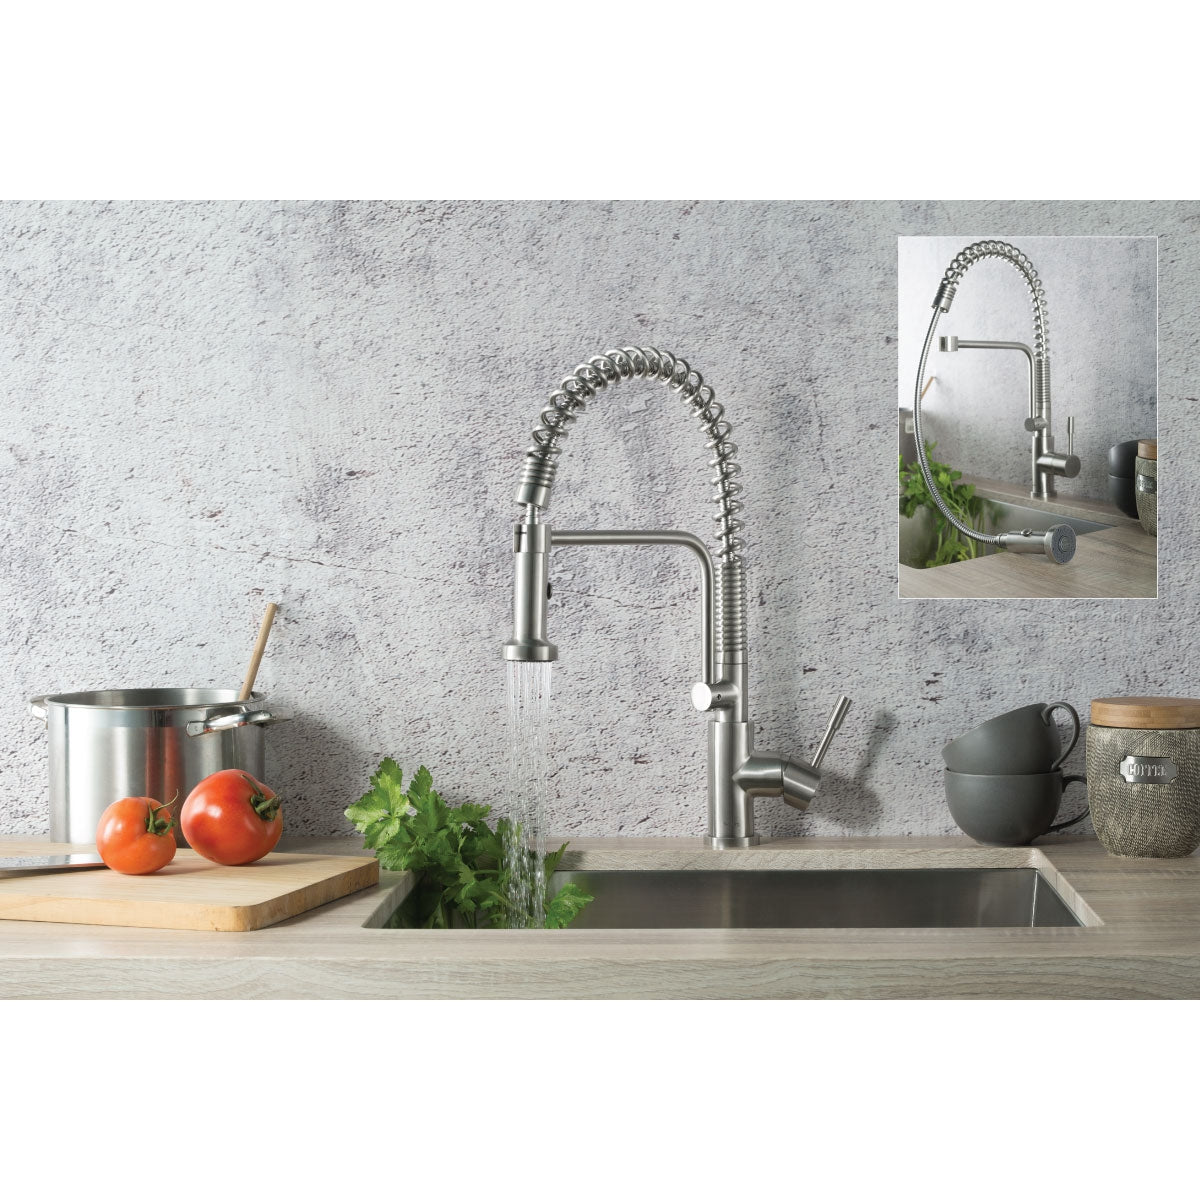 Isenberg Klassiker Caso 19" Semi-Professional Stainless Steel Pull-Down Kitchen Faucet With Dual Function Sprayer